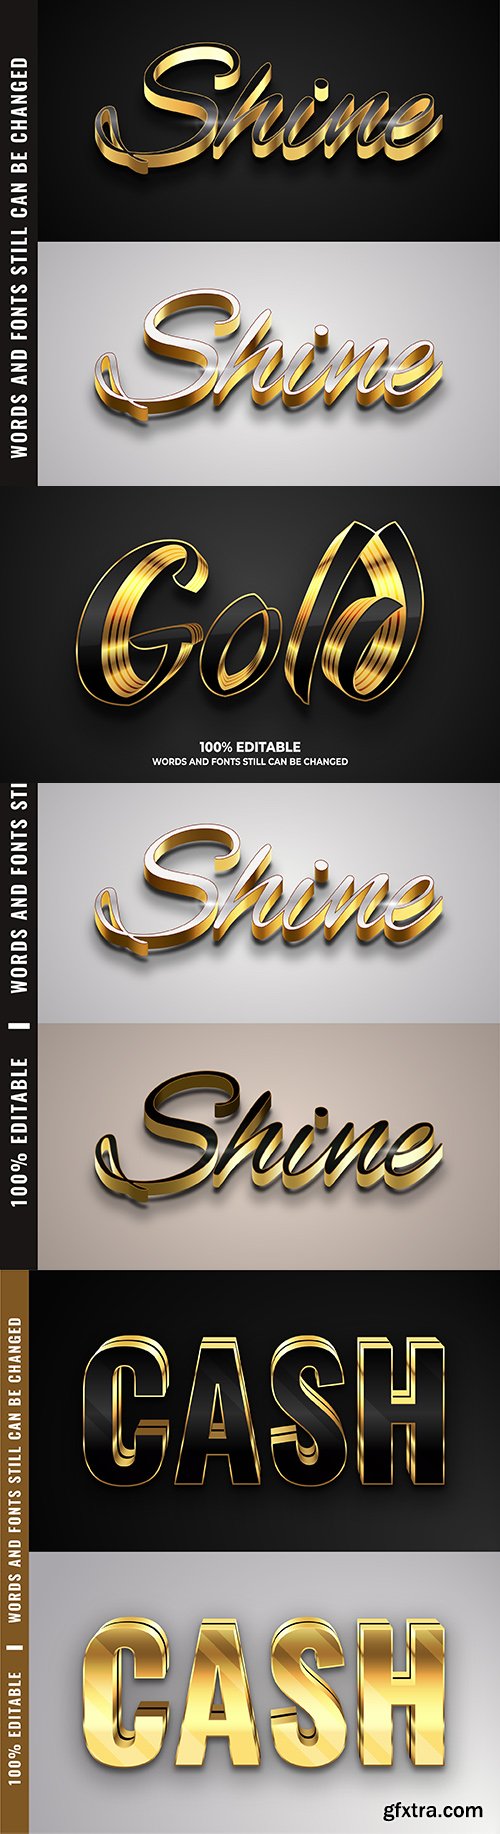 Editable font gold effect text collection illustration